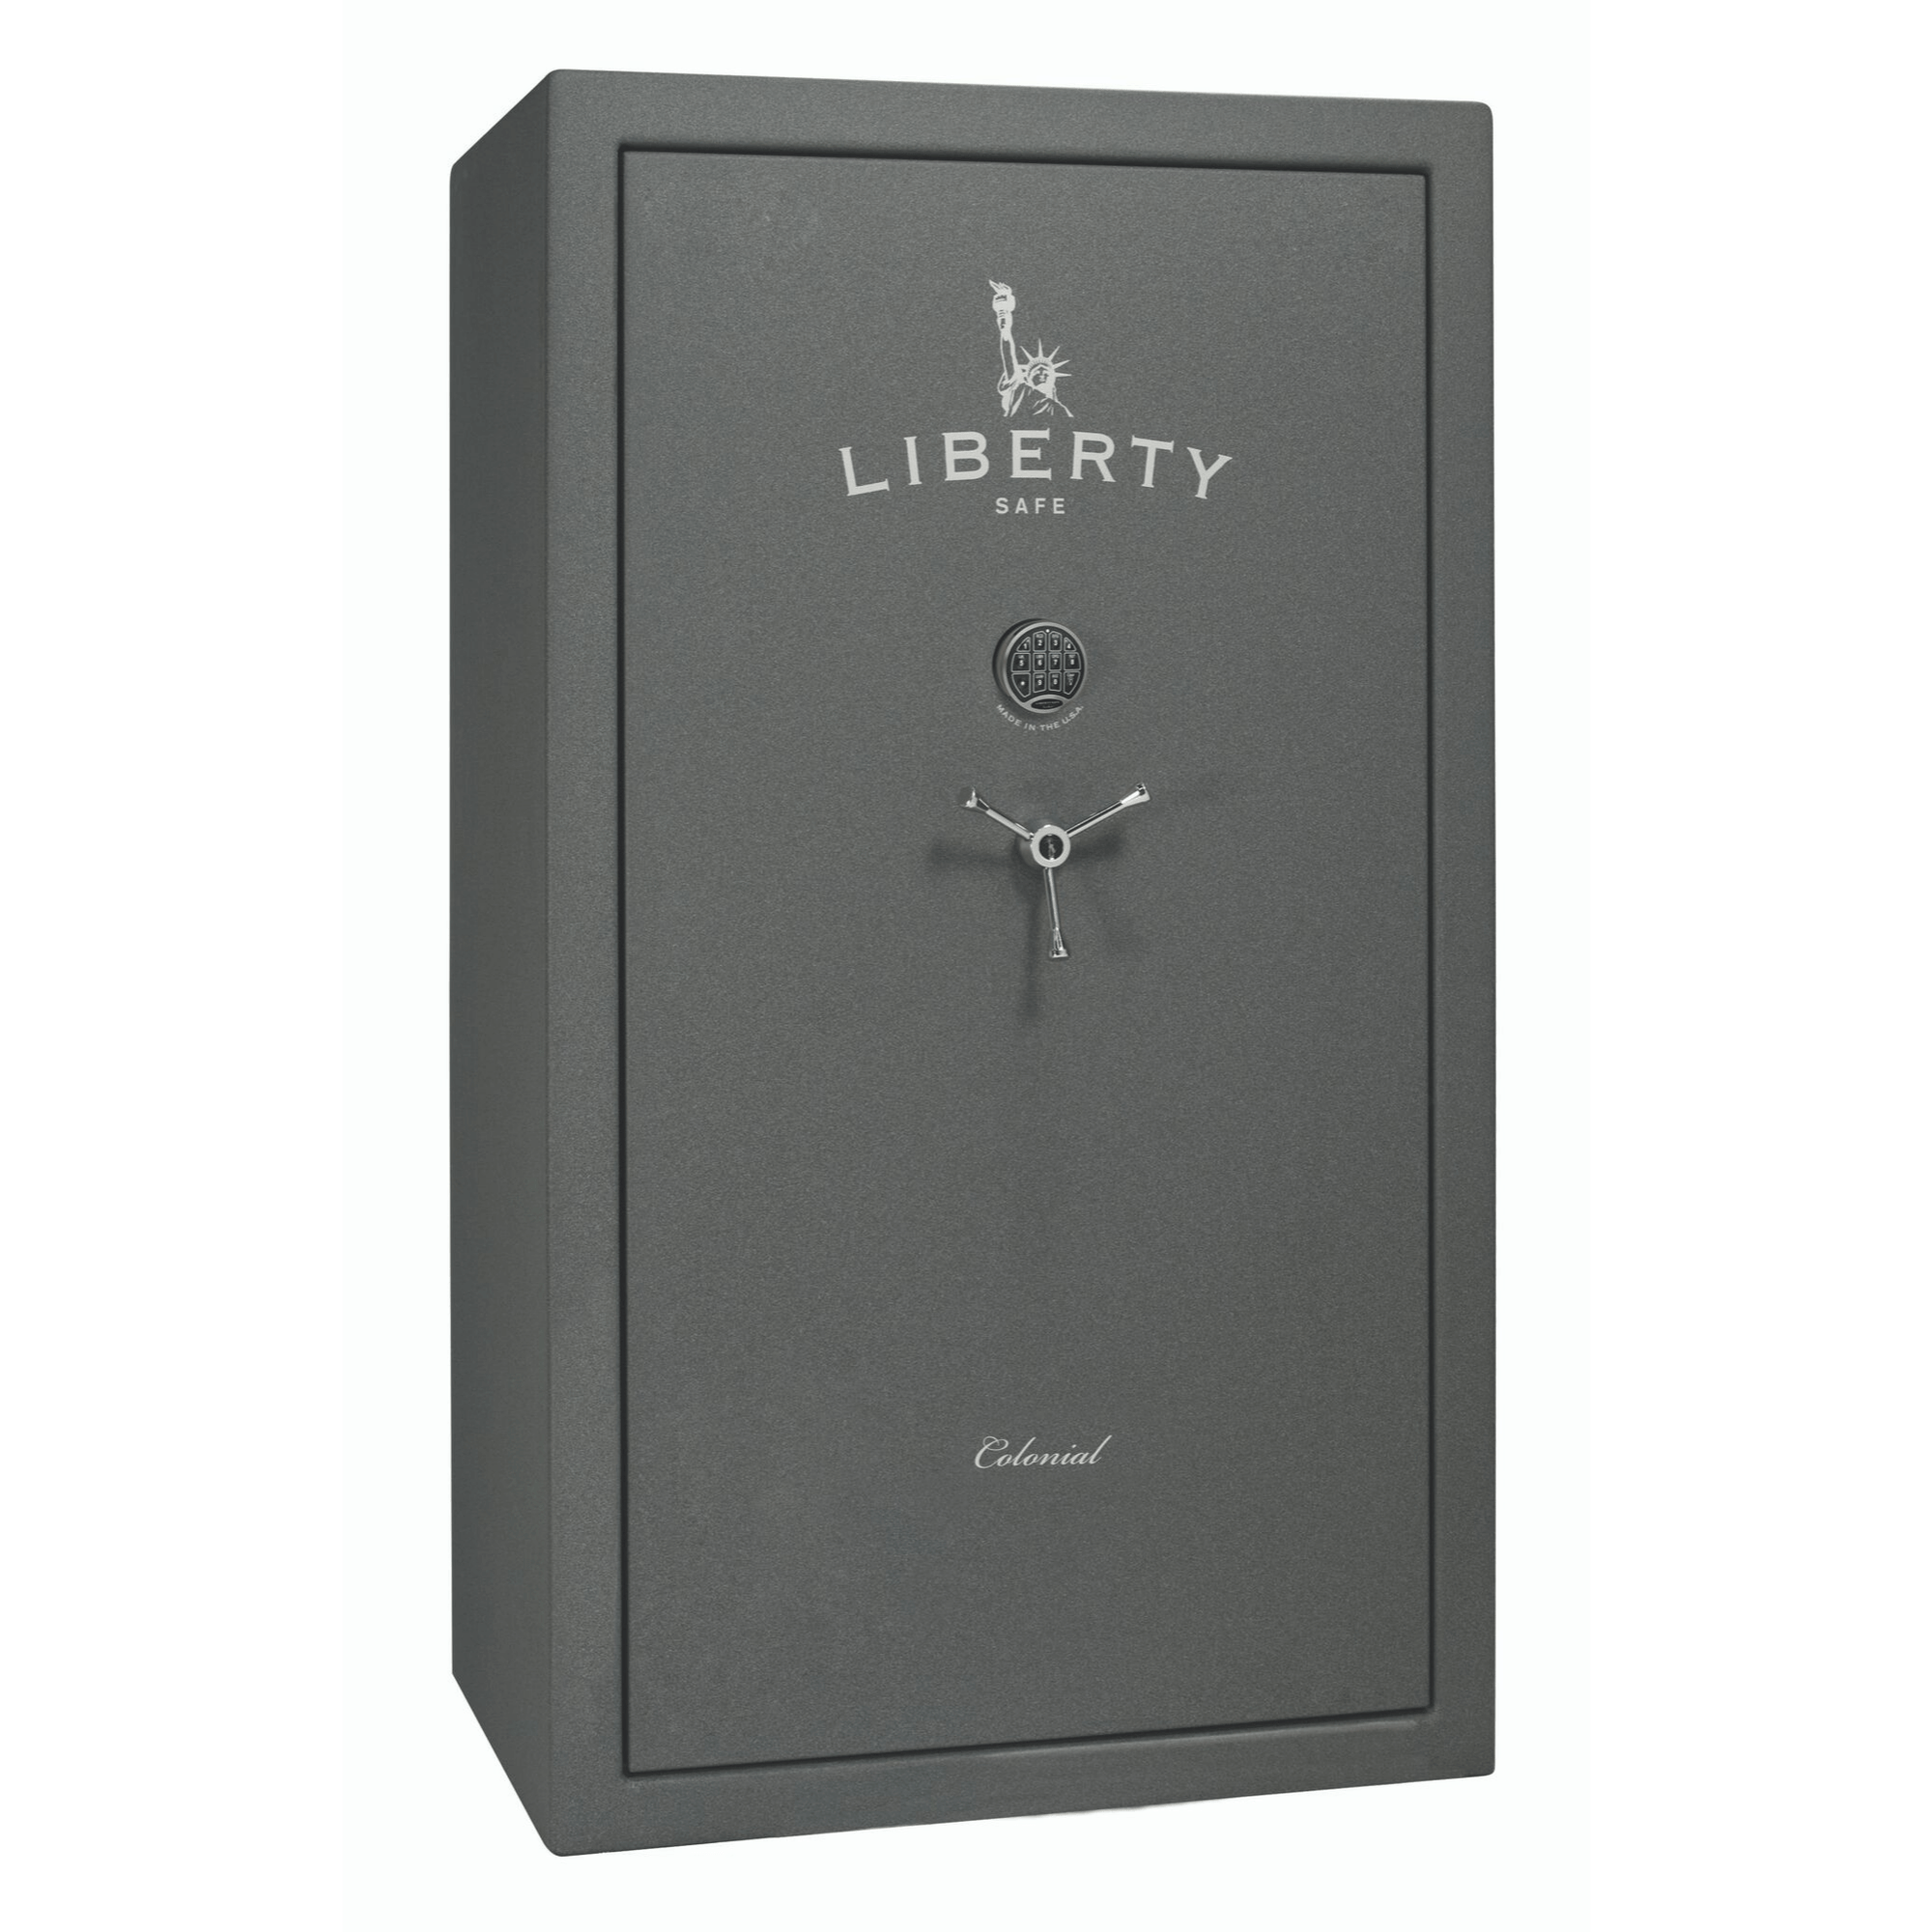 Colonial 50 | Level 4 Security | 75 Minute Fire Protection | Textured Granite Chrome Electronic Lock | Dimensions: 72.5" H x 42" W x 27.5" D - Closed Door